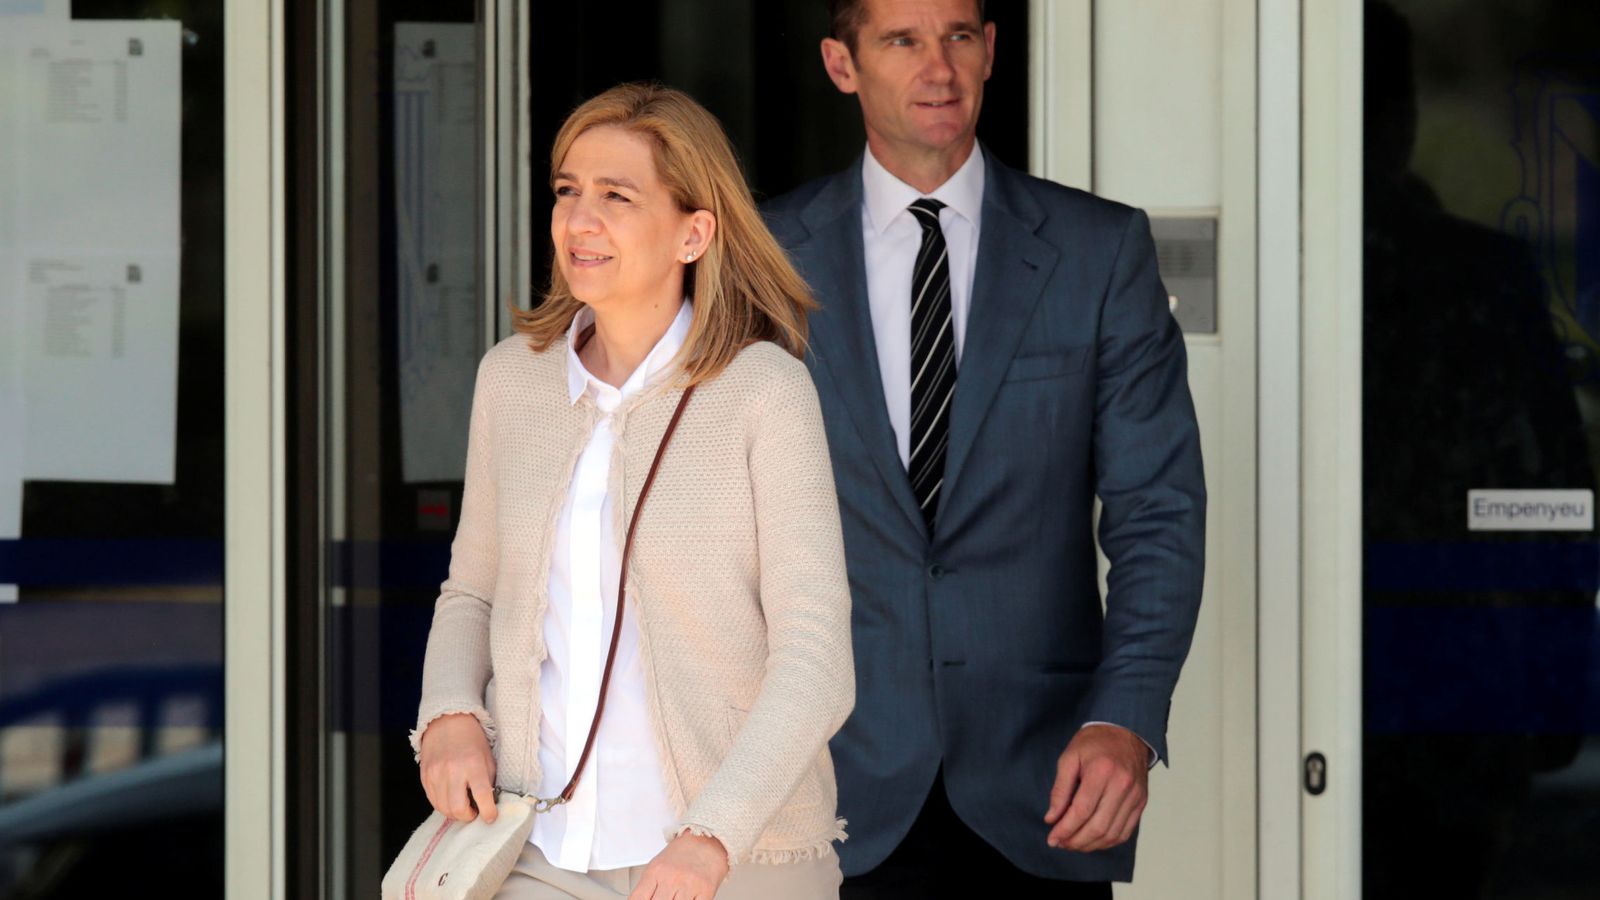 Foto: Spain's princess cristina leaves court with her husband inaki urdangarin after attending a trial in palma de mallorca